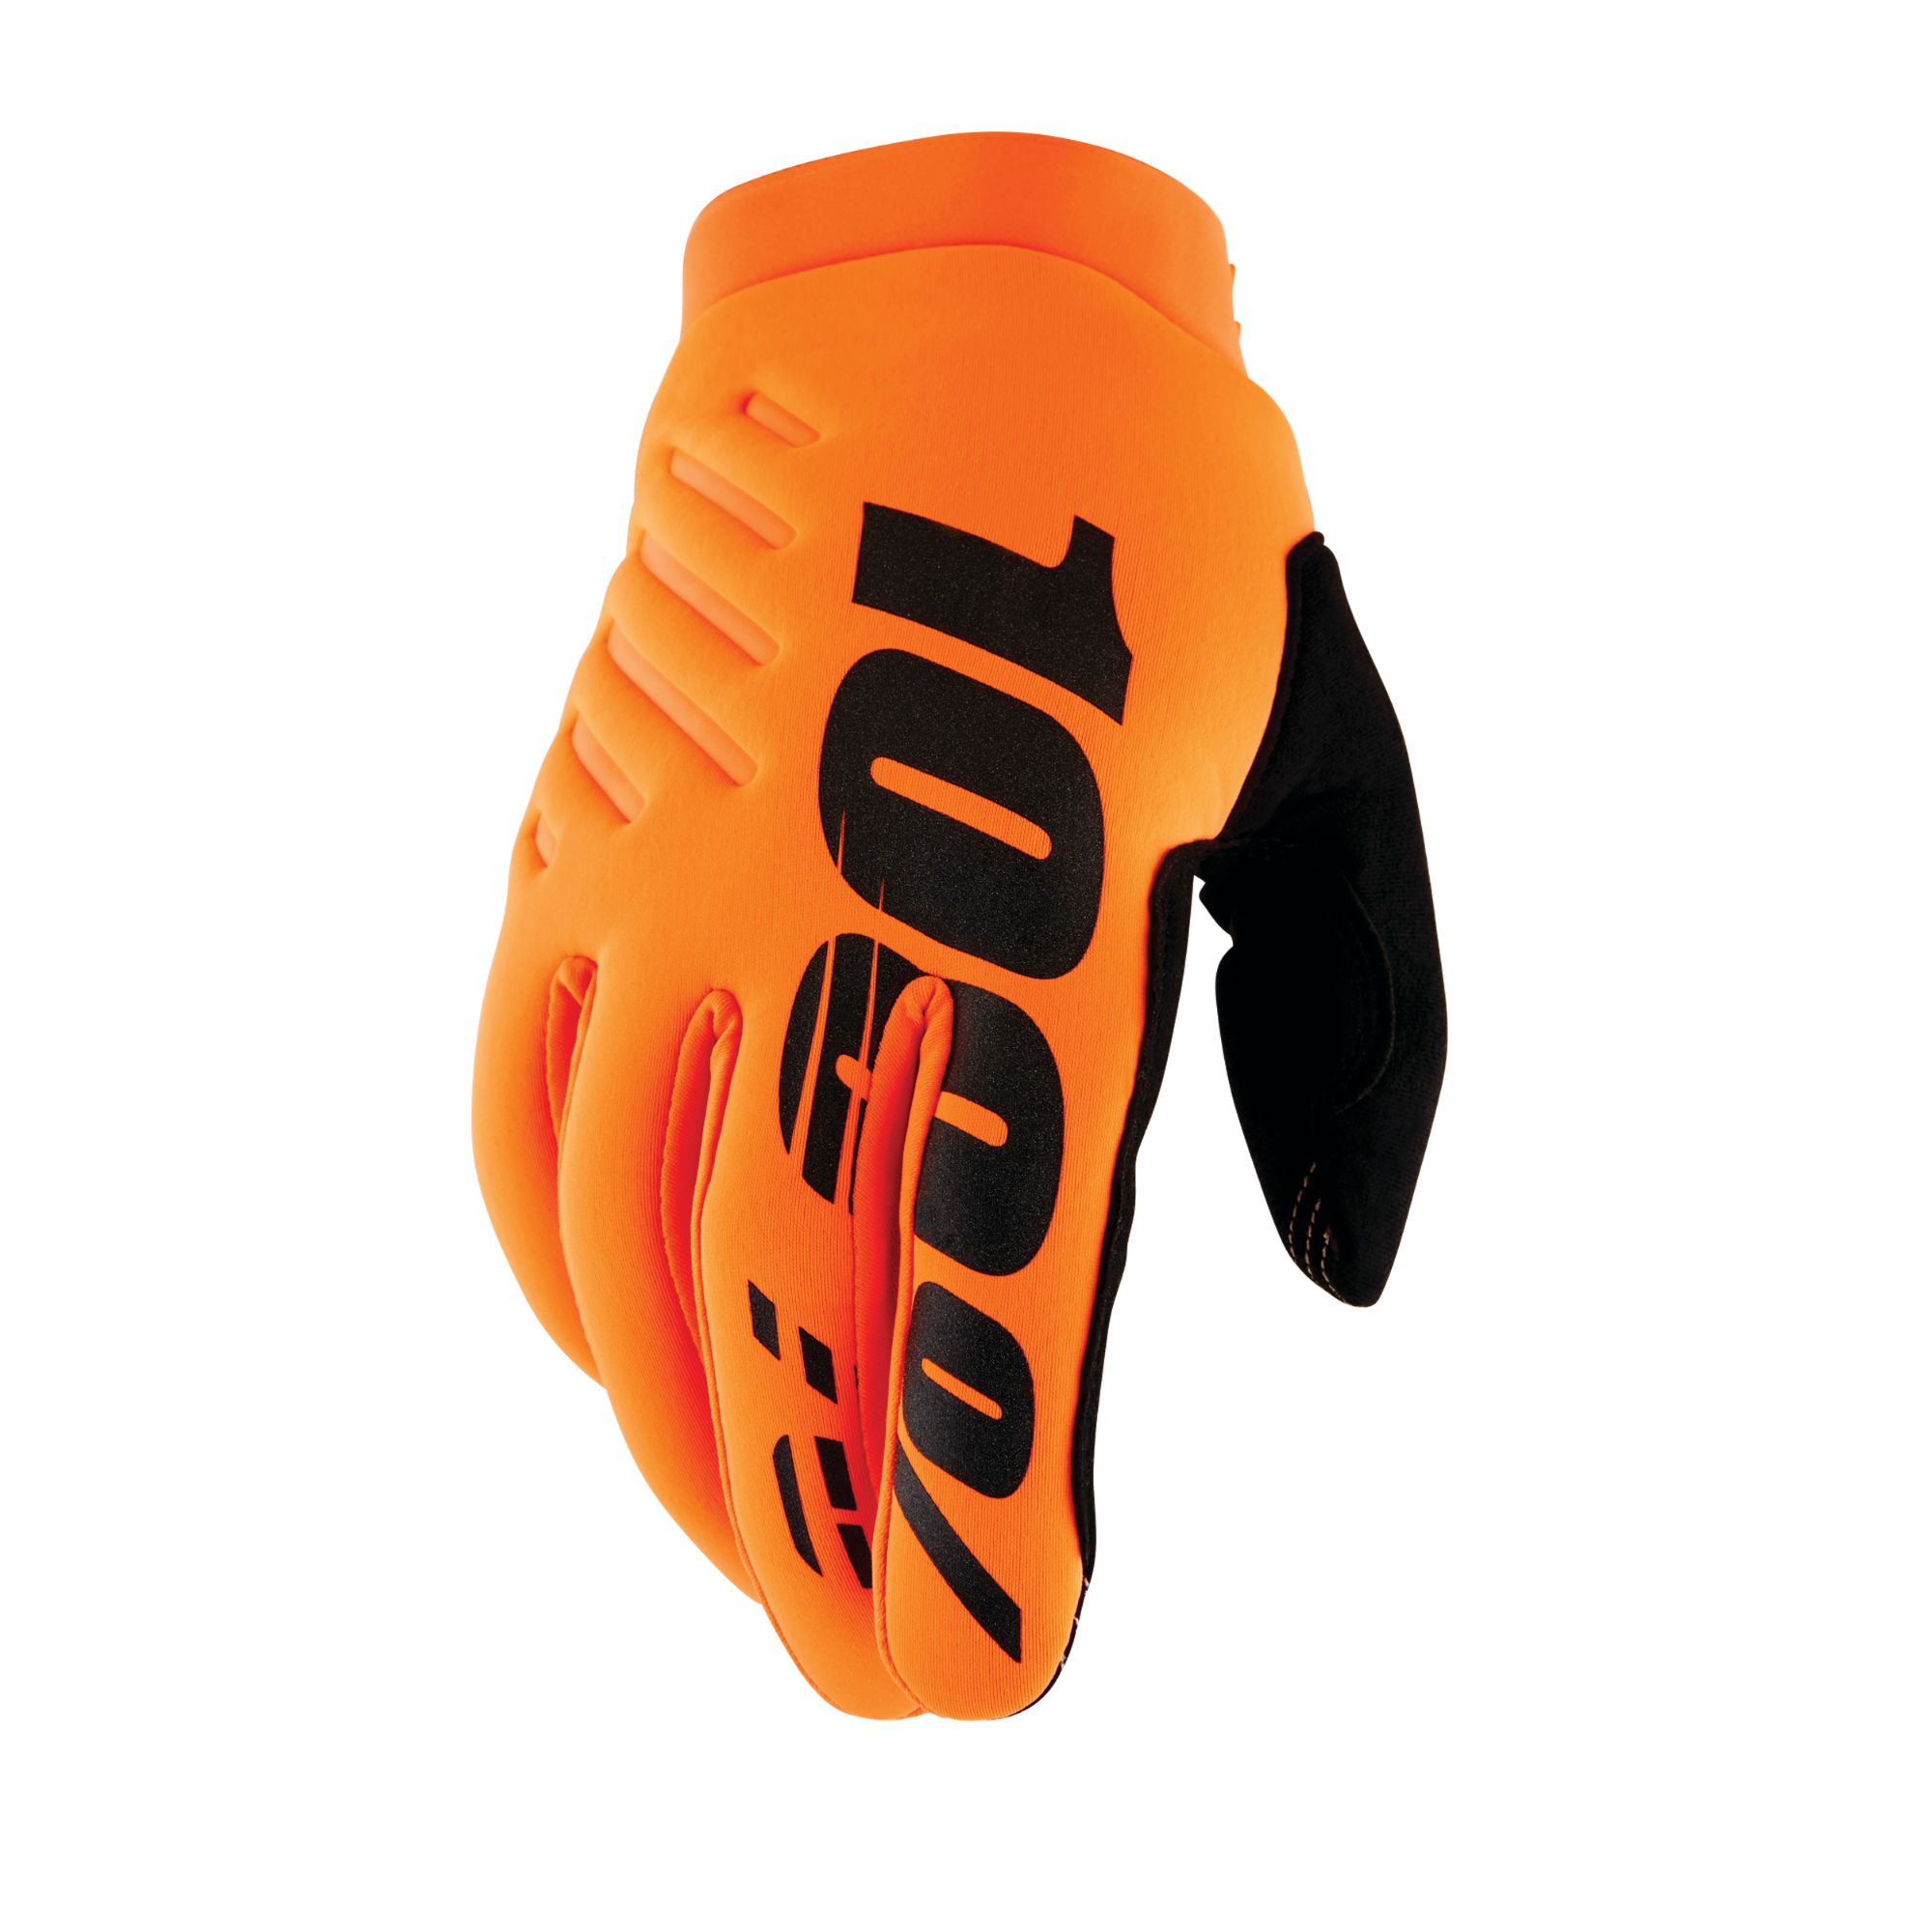 Kid's Full Finger Cycling Gloves 100% Brisker Youth AW22 Cold Weather Fluro Orange/Black X Large